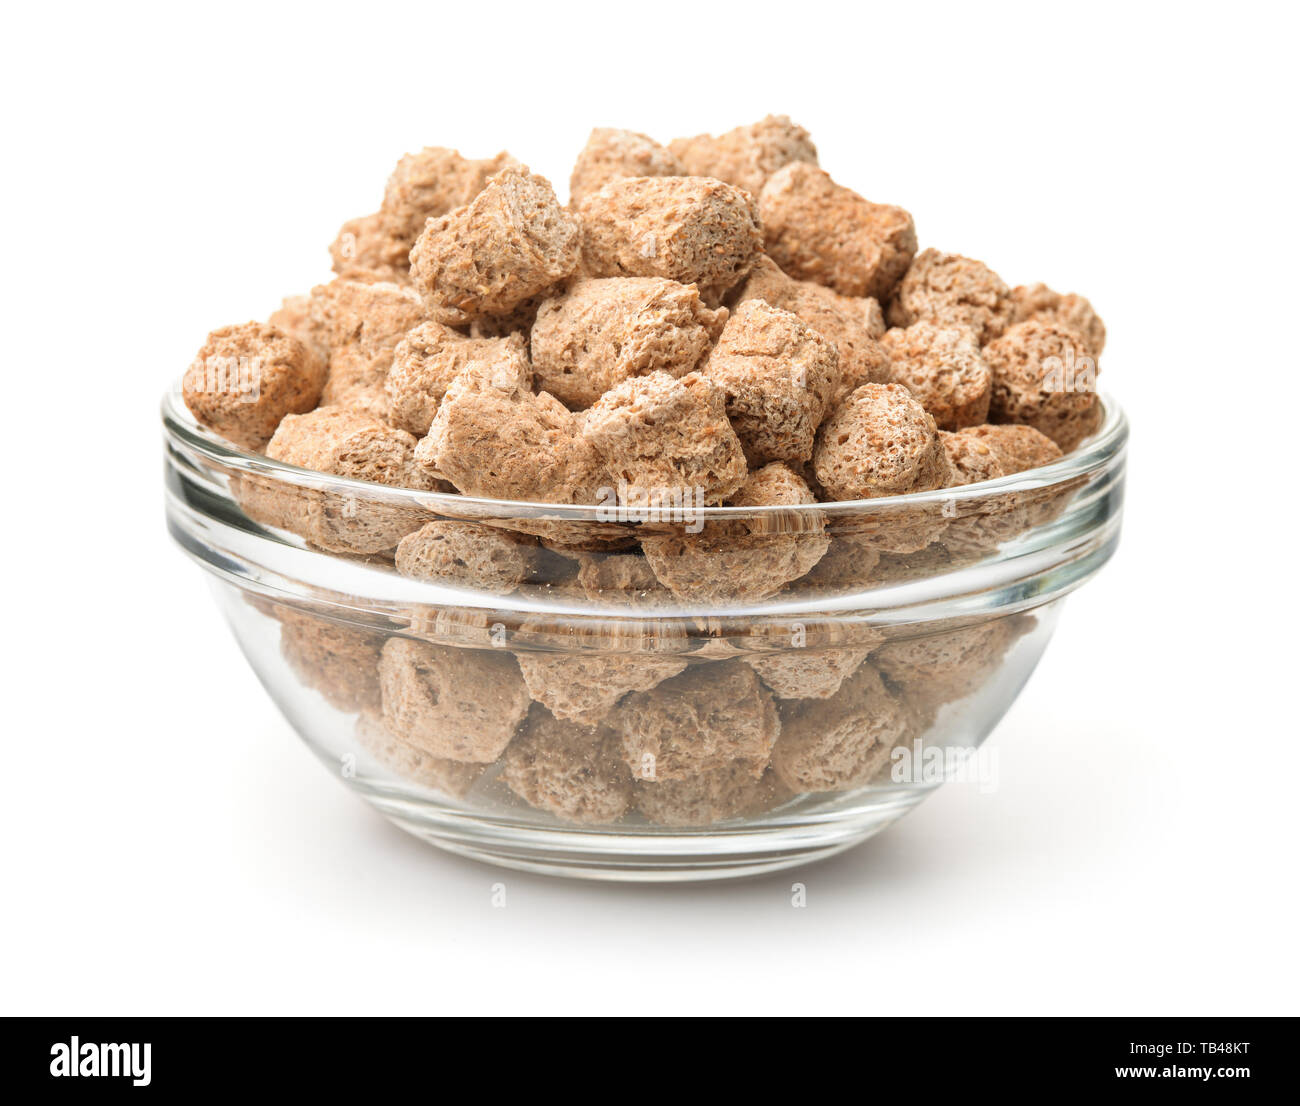 Glass bowl of extruded oats bran pellets isolated on white Stock Photo